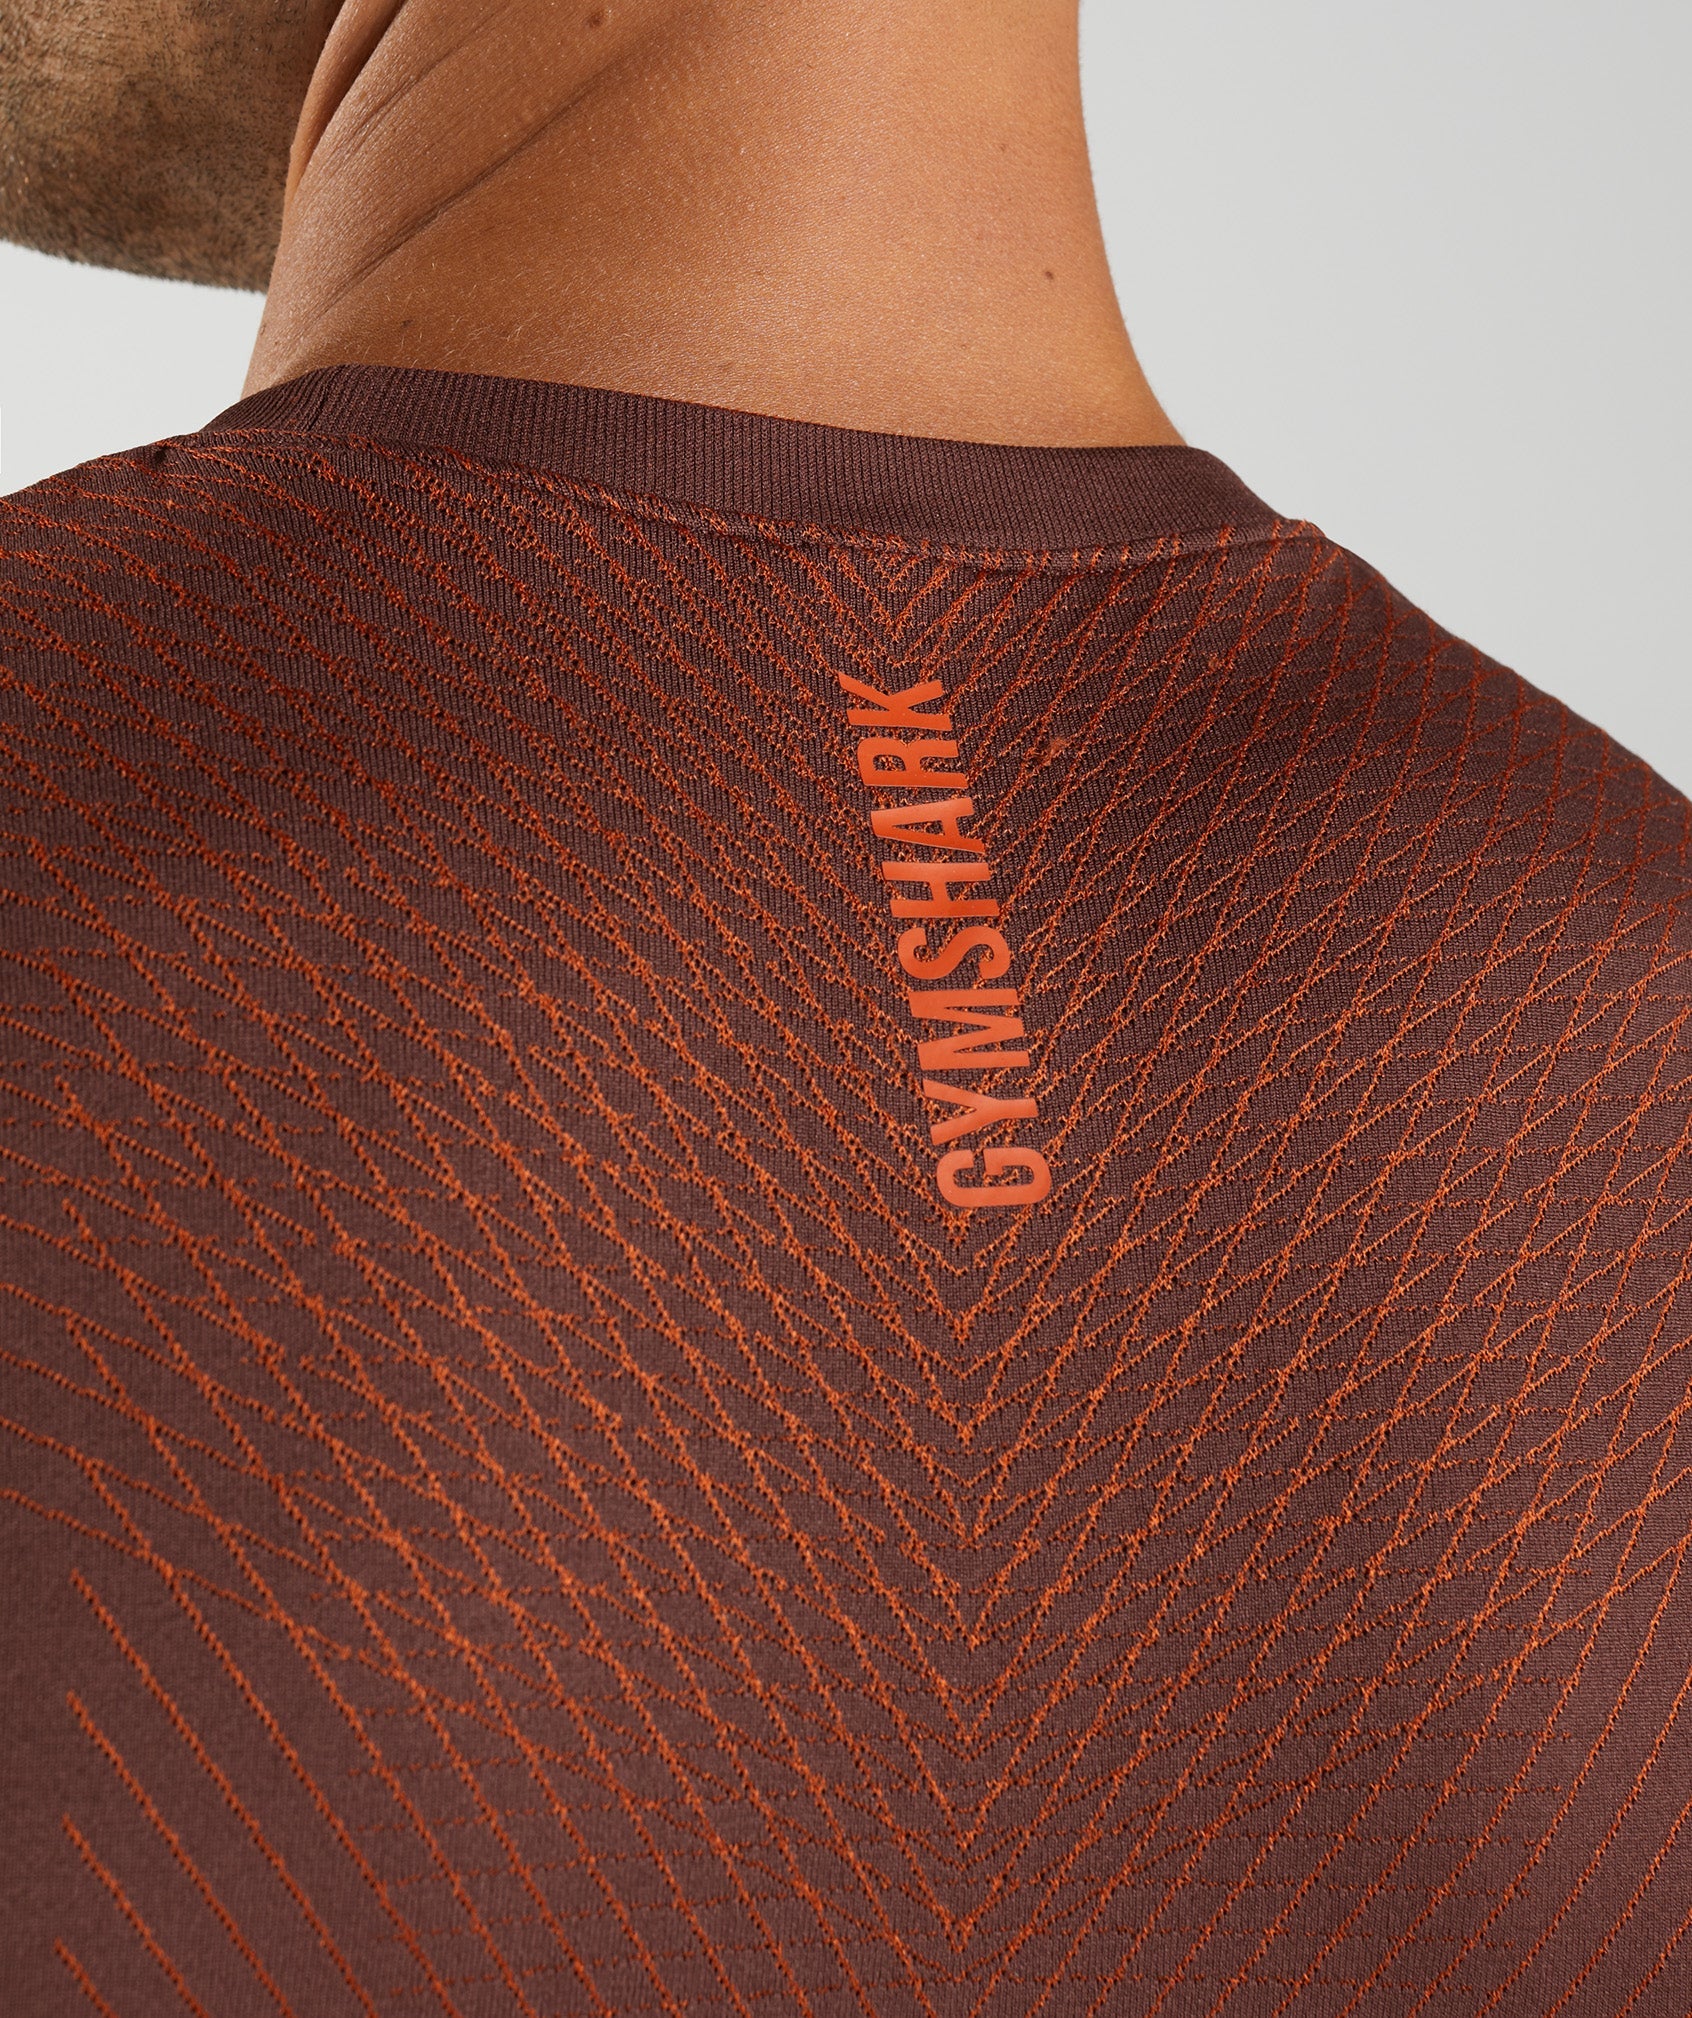 Apex Seamless Tank in Cherry Brown/Pepper Red - view 5